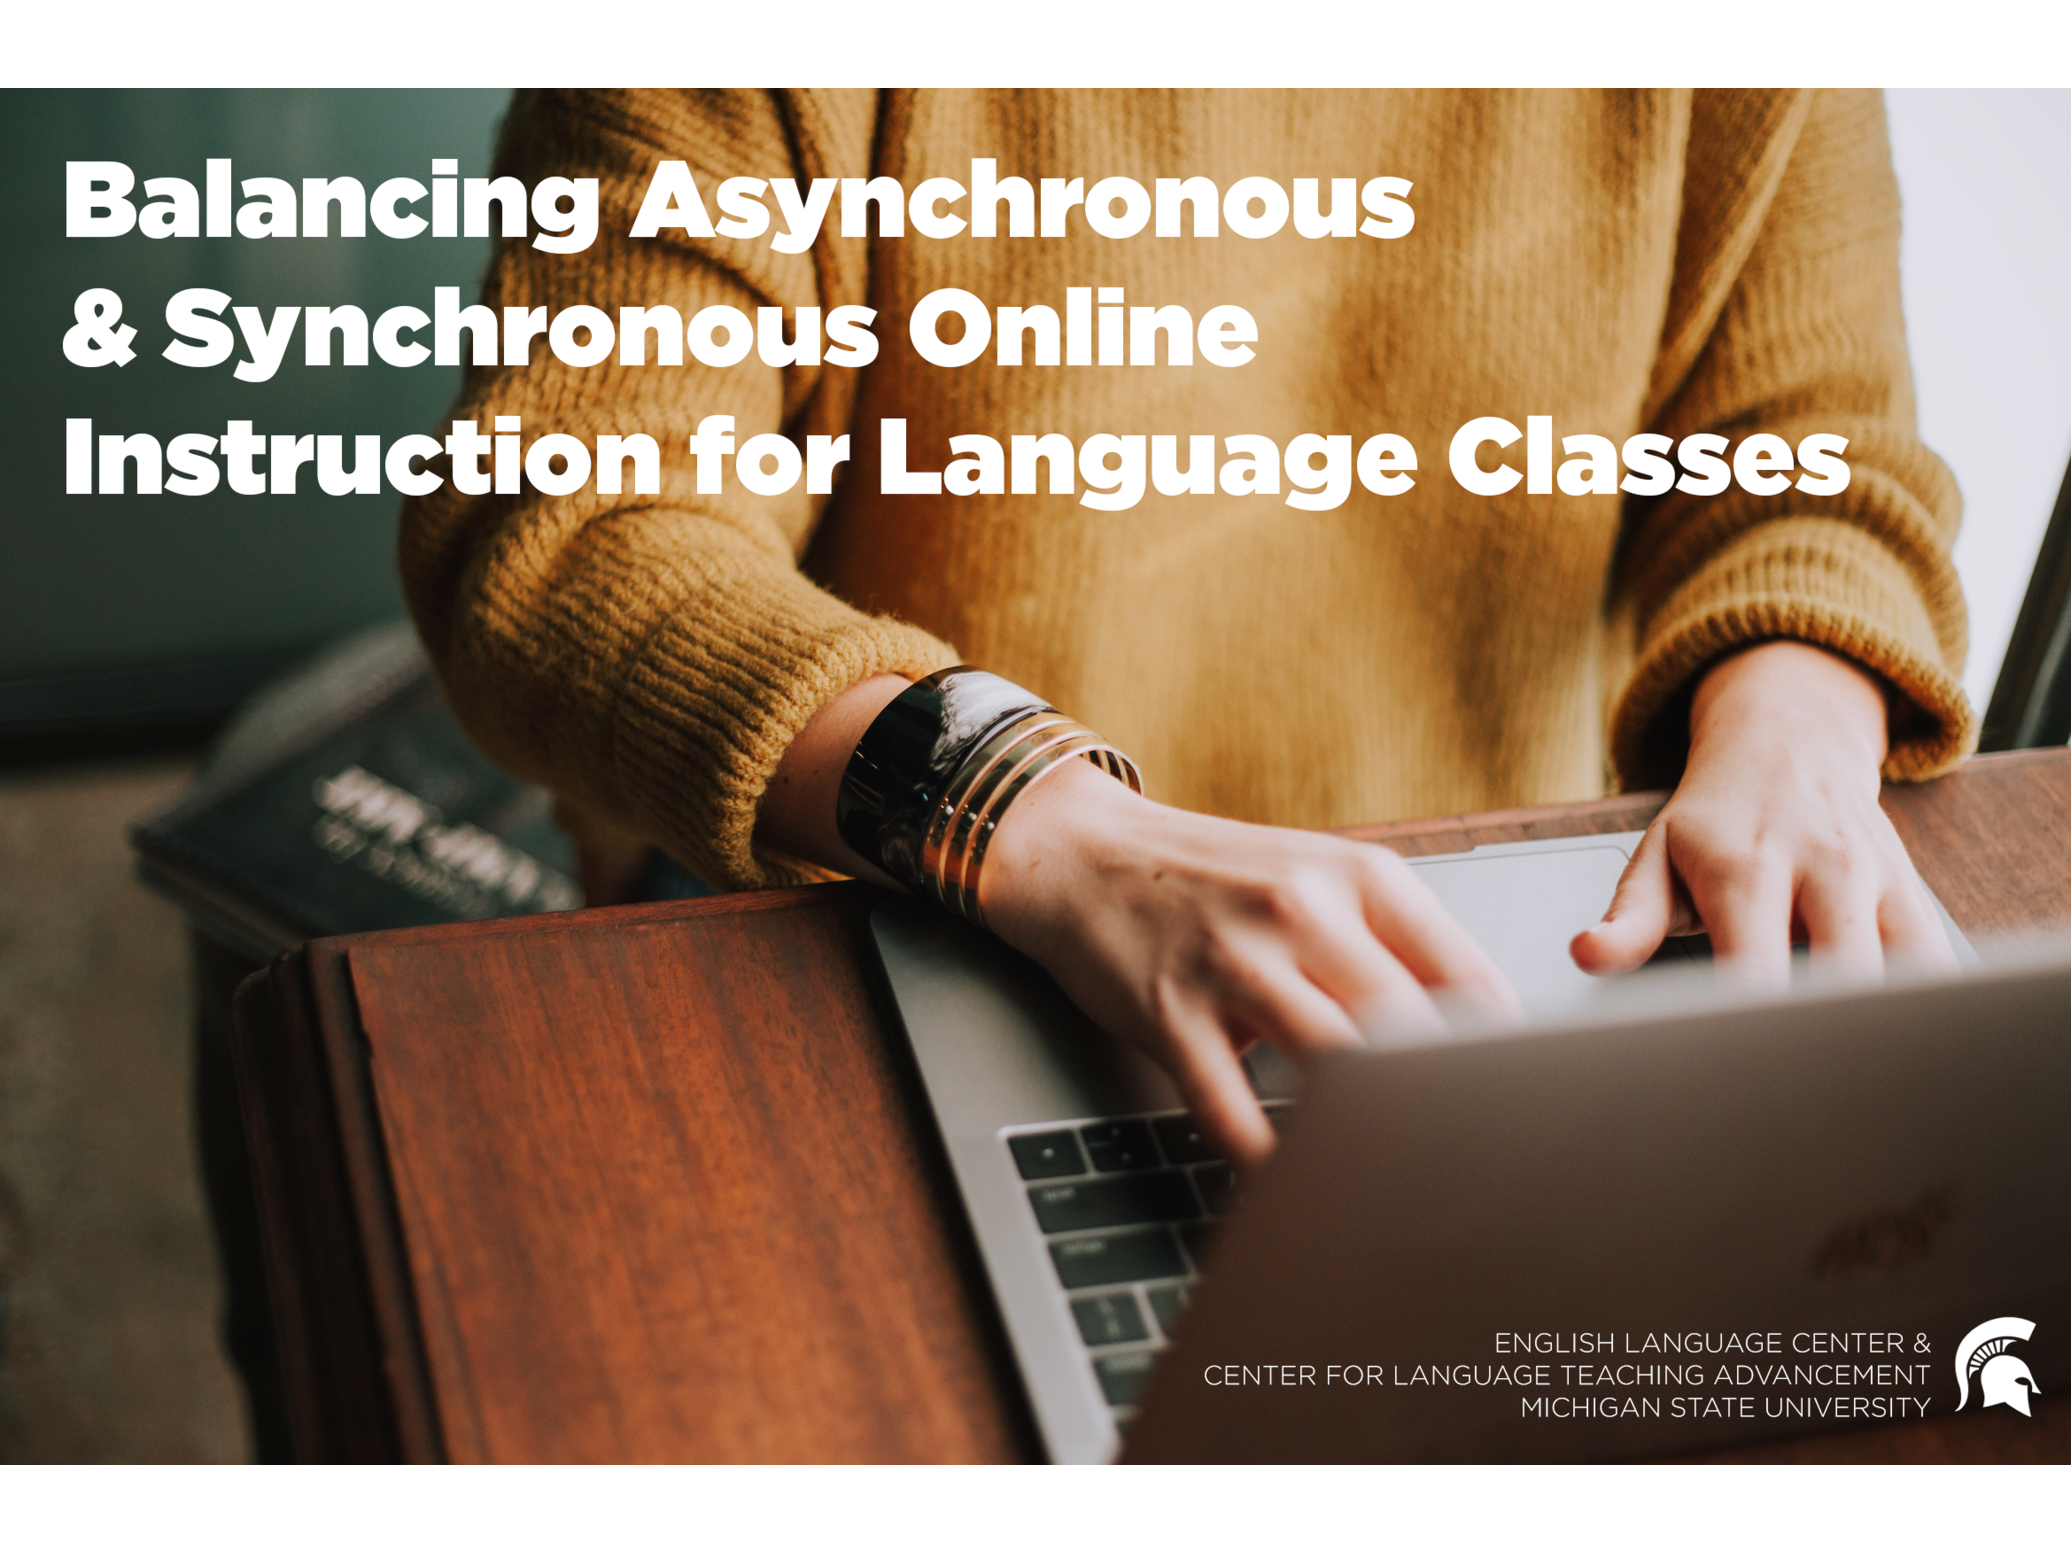 Balancing Asynchronous & Synchronous Online Instruction for Language Classes